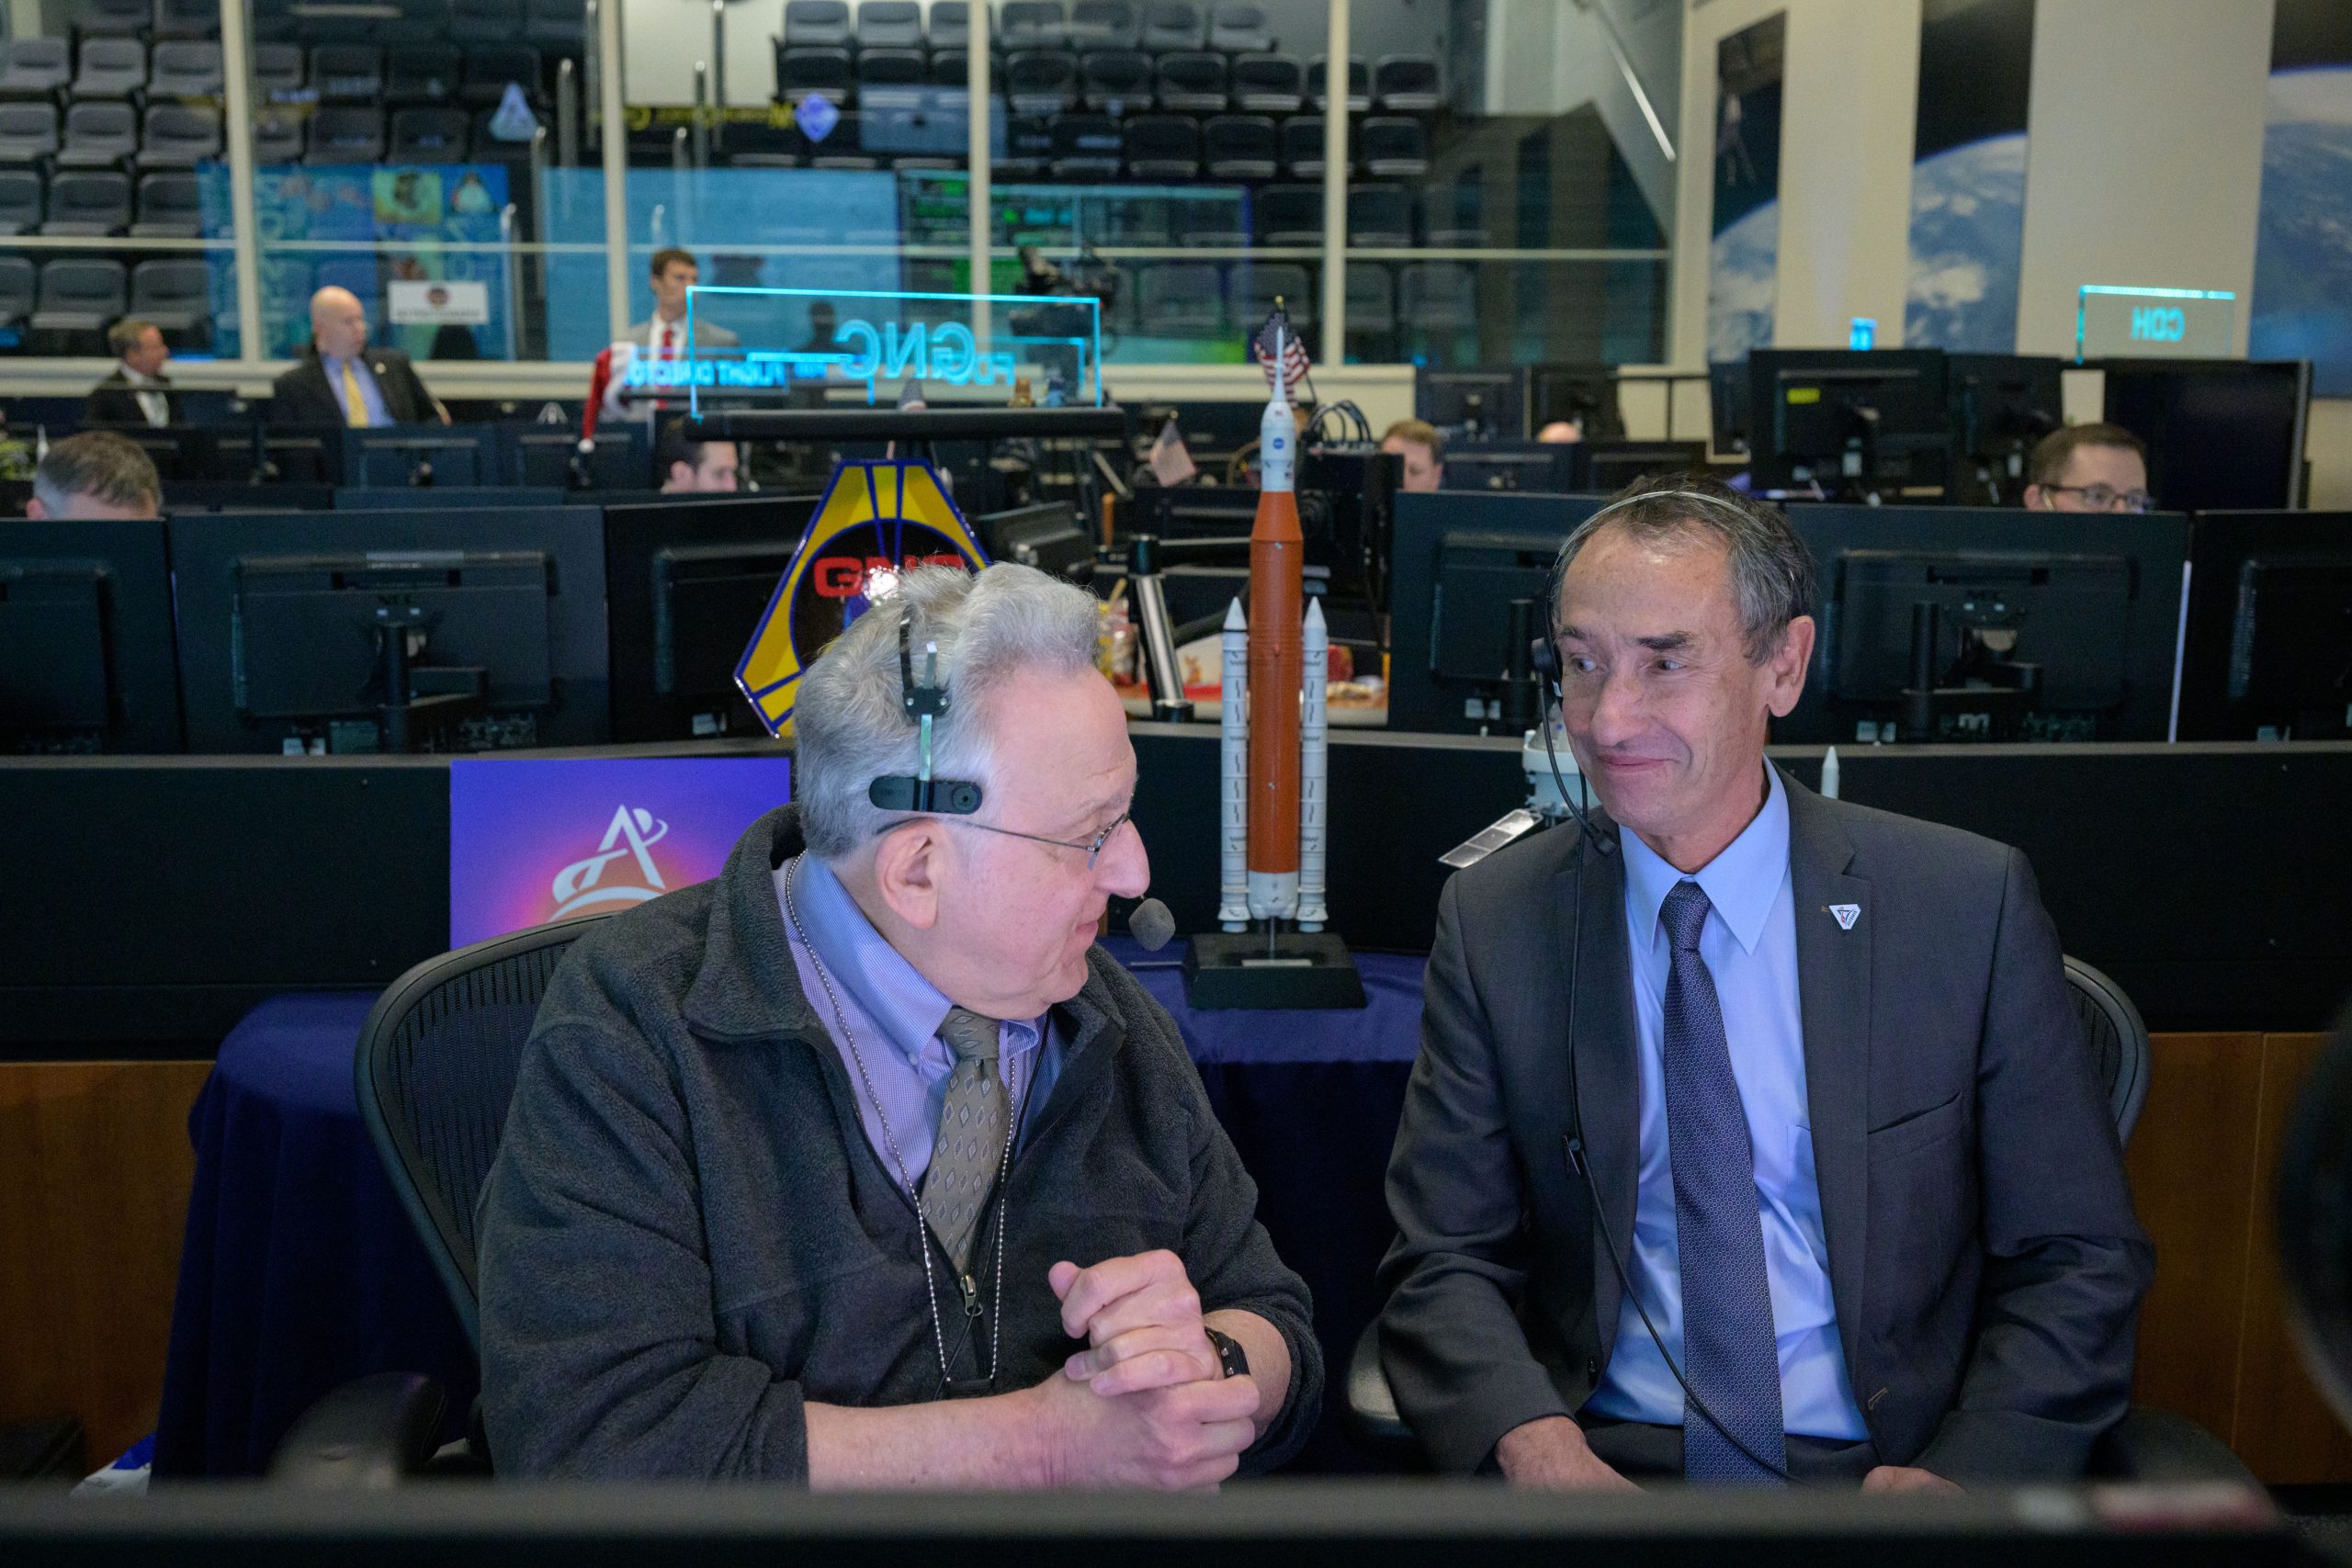 Philippe Deloo speaking with Rob Navias for NASA TV during the Artemis I mission Credit: NASA